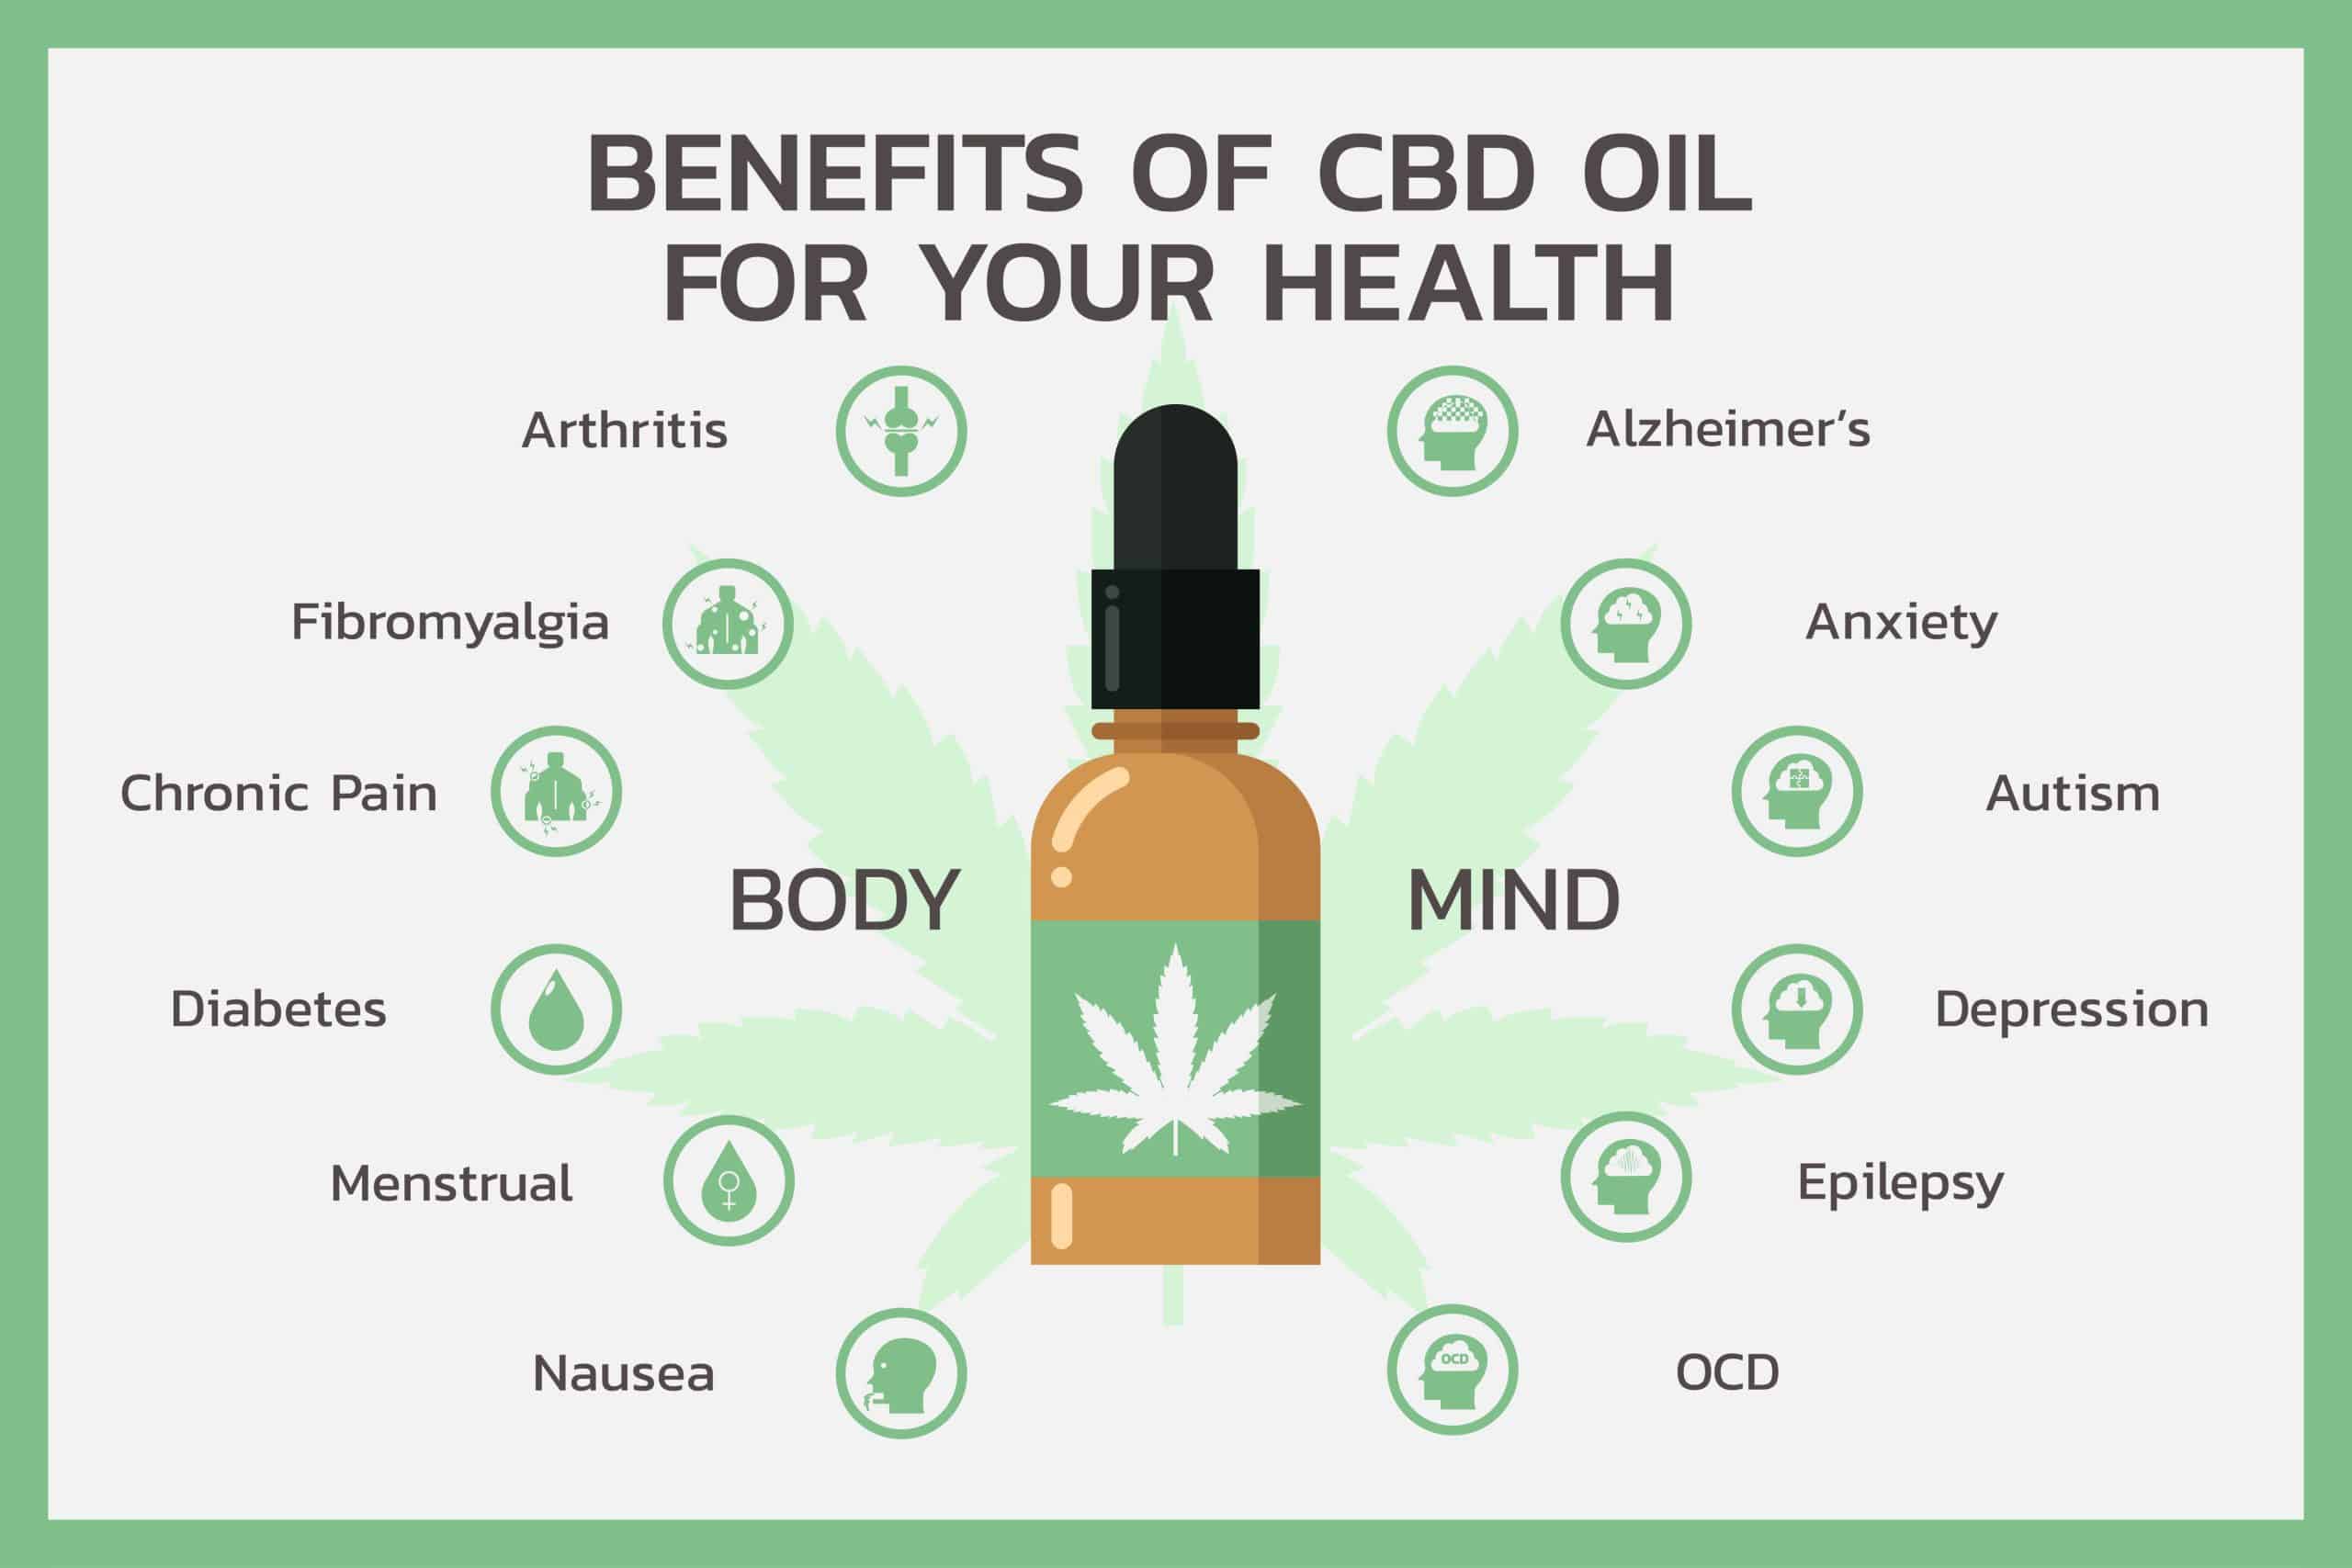 If a loved one has Alzheimer's, make sure you have the facts with our CBD vs THC guide. Making an informed health decision is always a good idea.